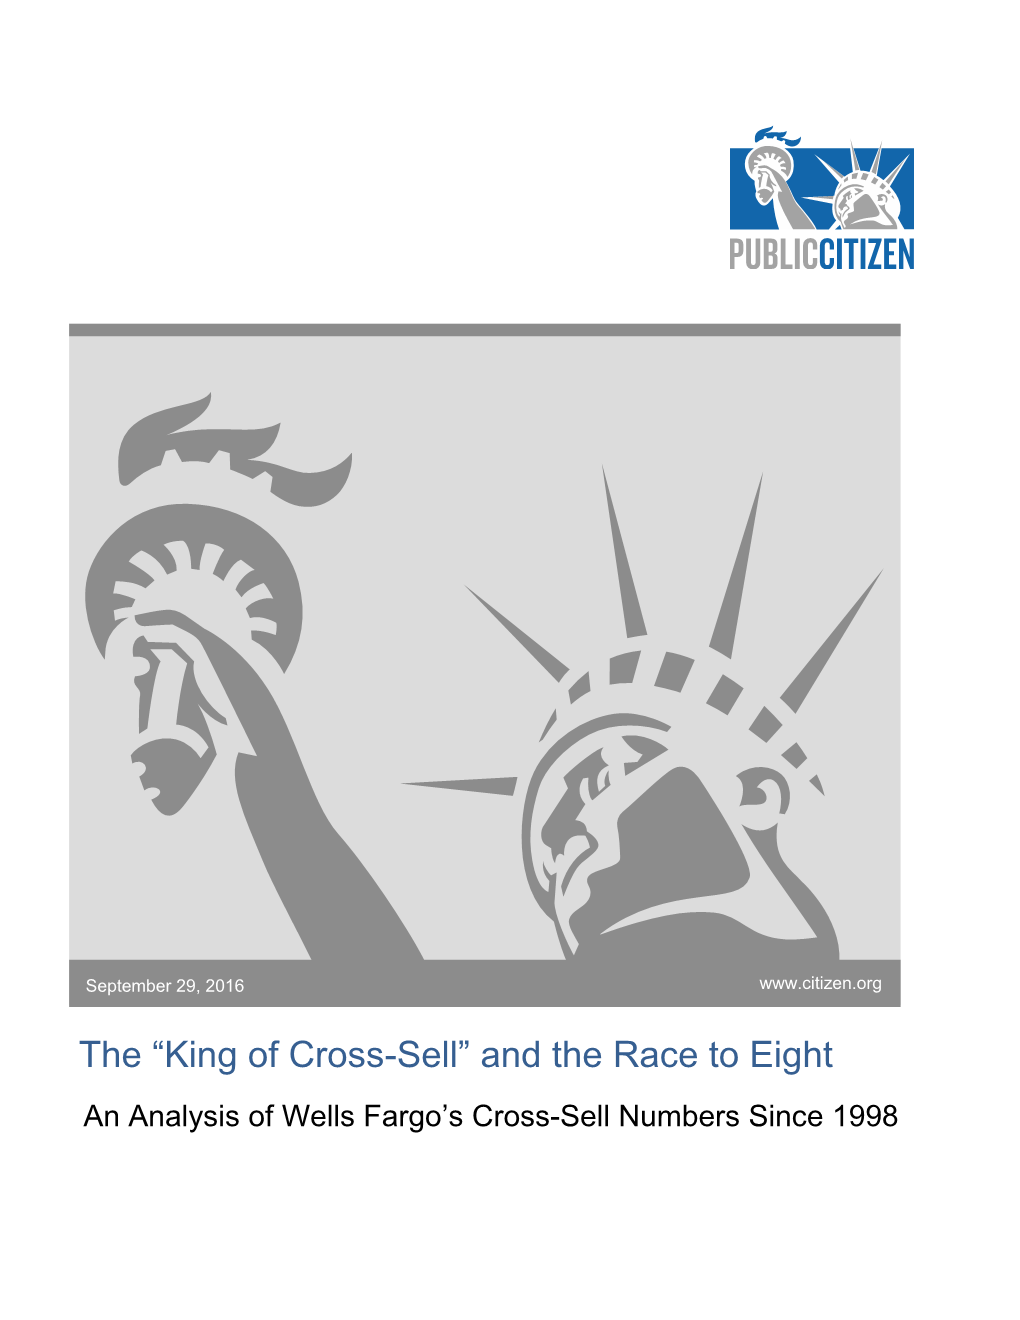 King of Cross-Sell” and the Race to Eight an Analysis of Wells Fargo’S Cross-Sell Numbers Since 1998